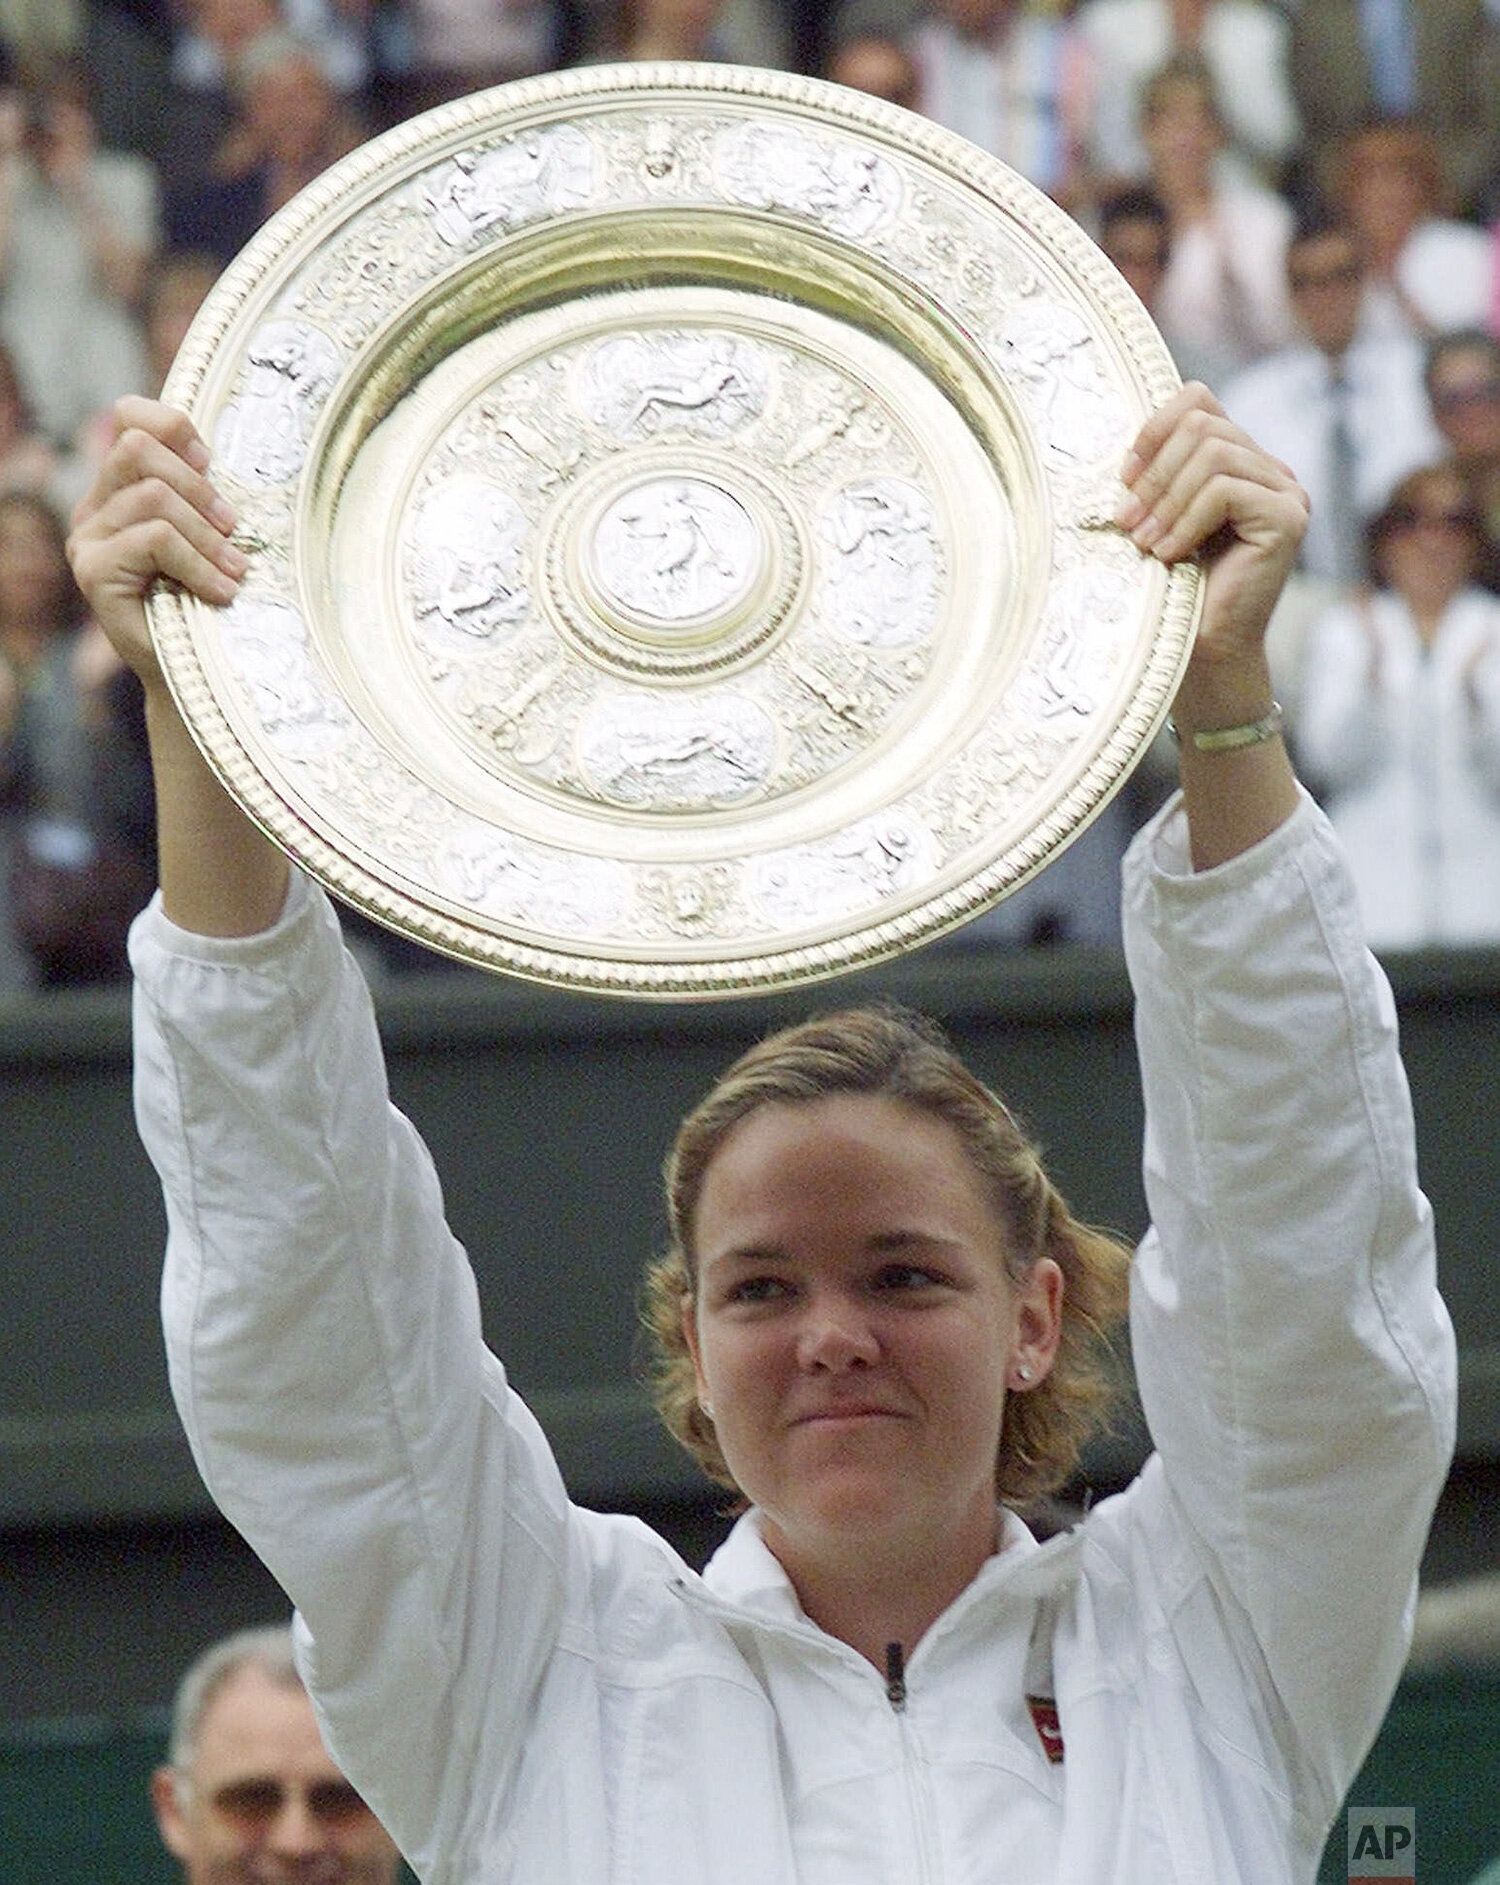  Lindsay Davenport holds her trophy, after defeating Steffi Graf in the women's singles final on Wimbledon's Center Court, Sunday July 4, 1999.  Davenport won the final 6-4, 7-5 to win the championship for the first time. (AP Photo/Dave Caulkin) 